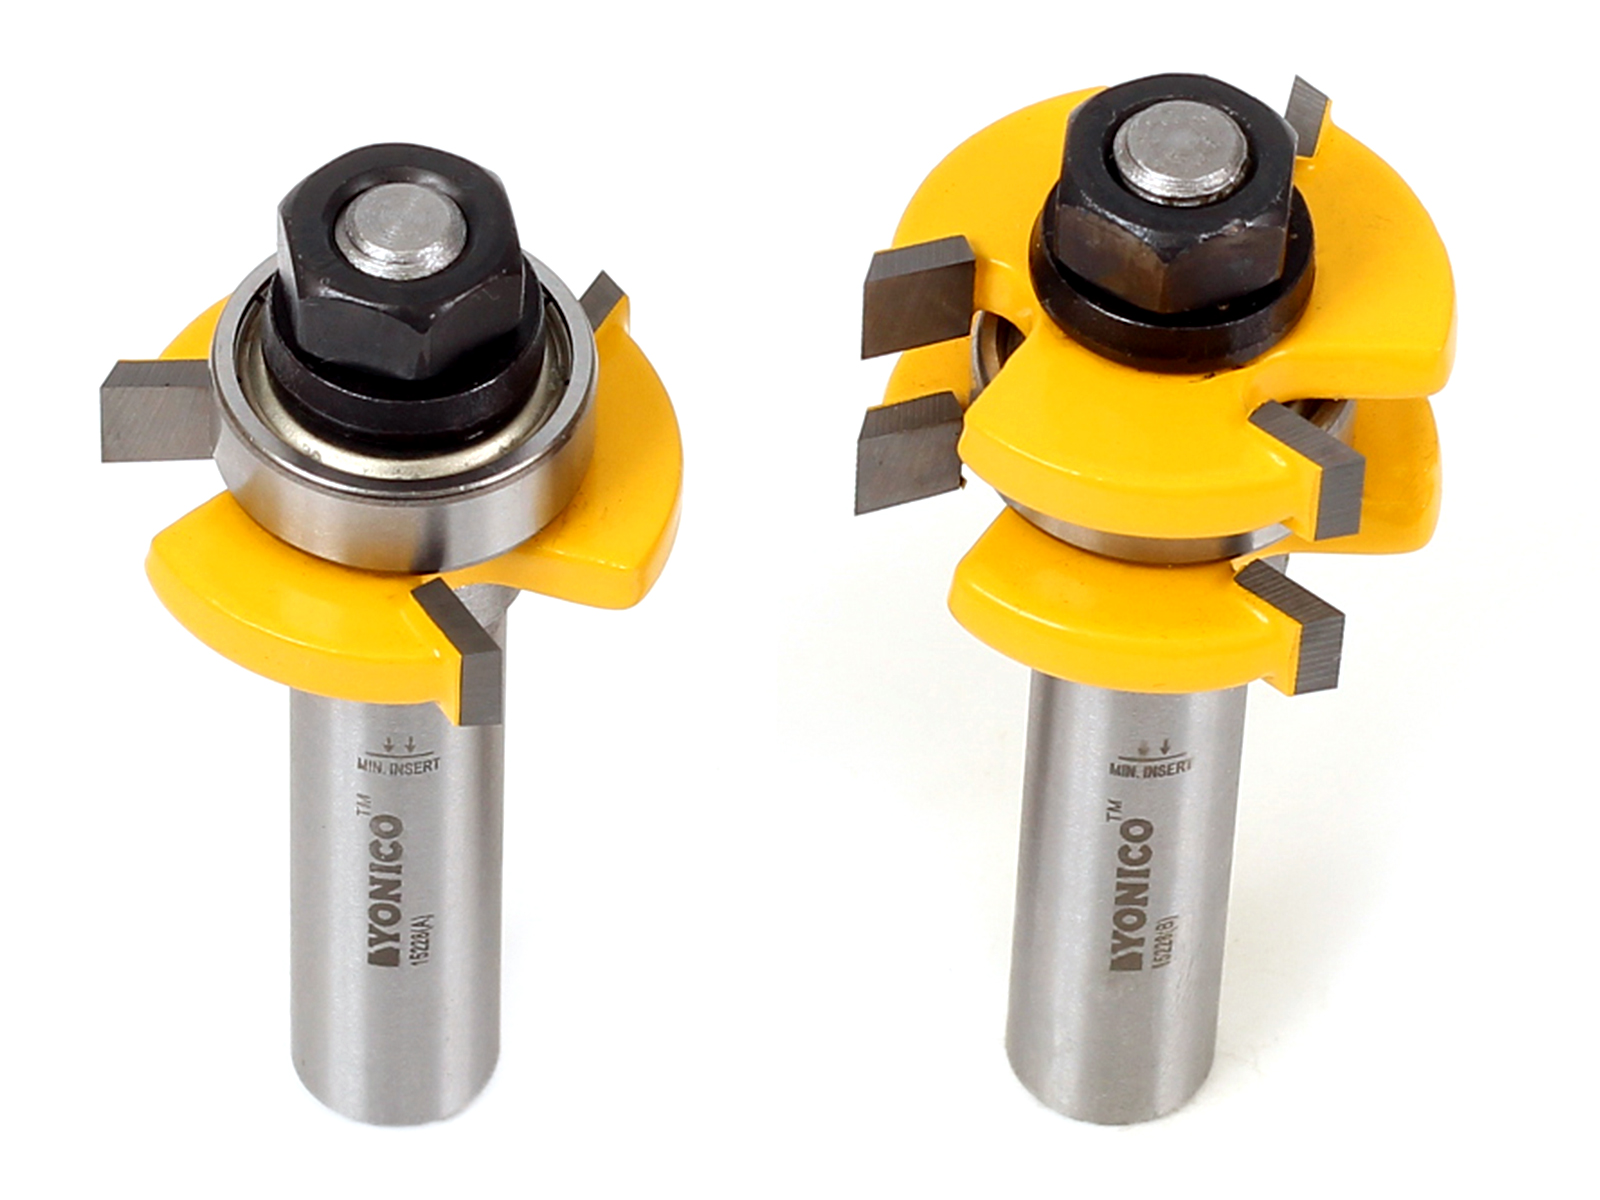 1 8 tongue and groove router bit